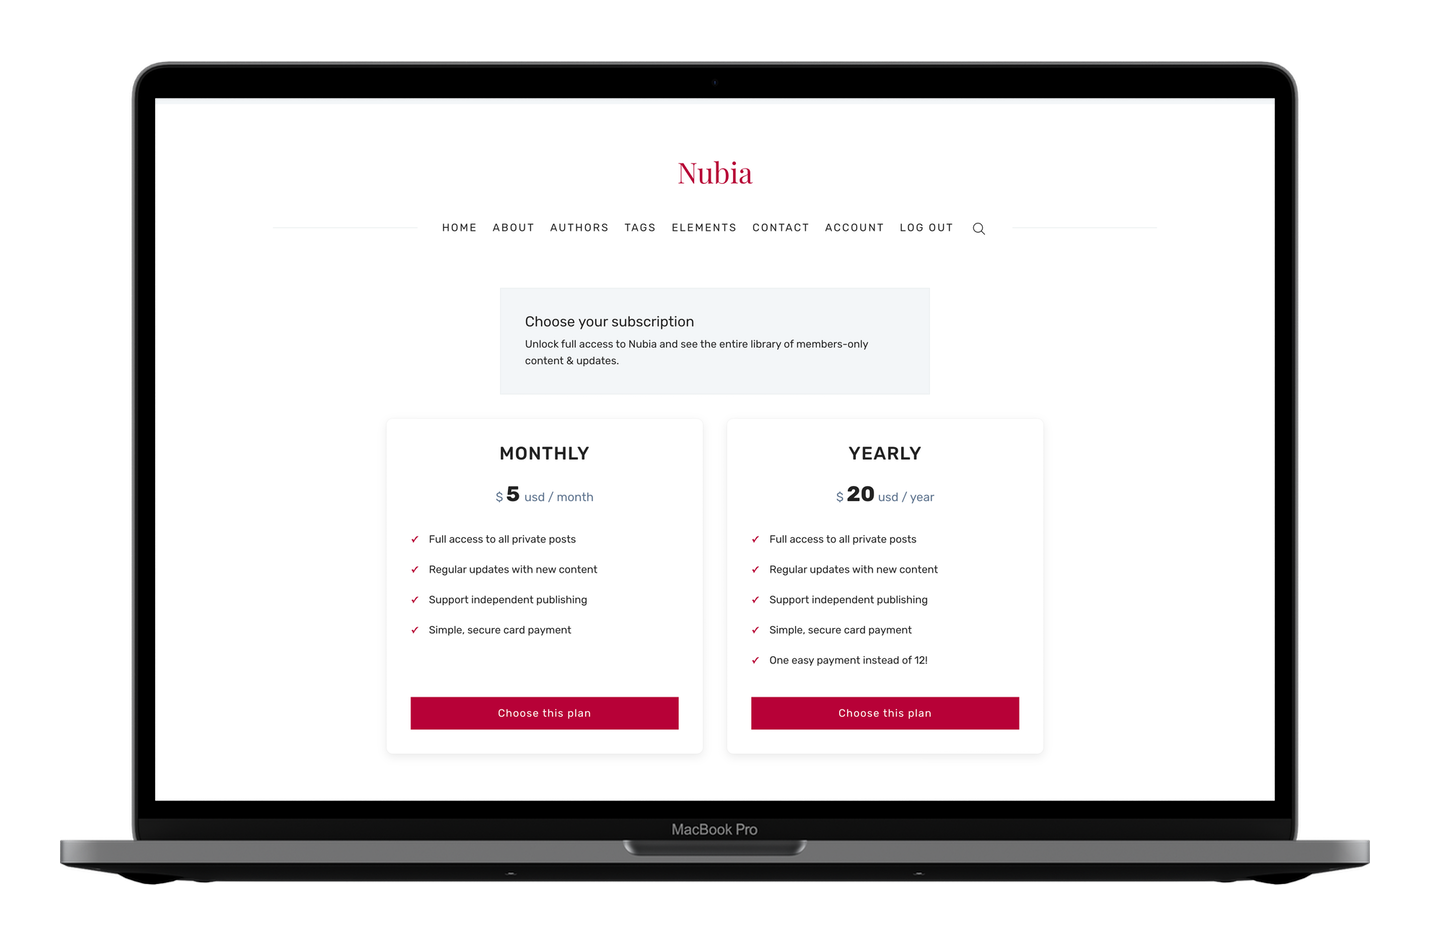 Nubia Pricing Page